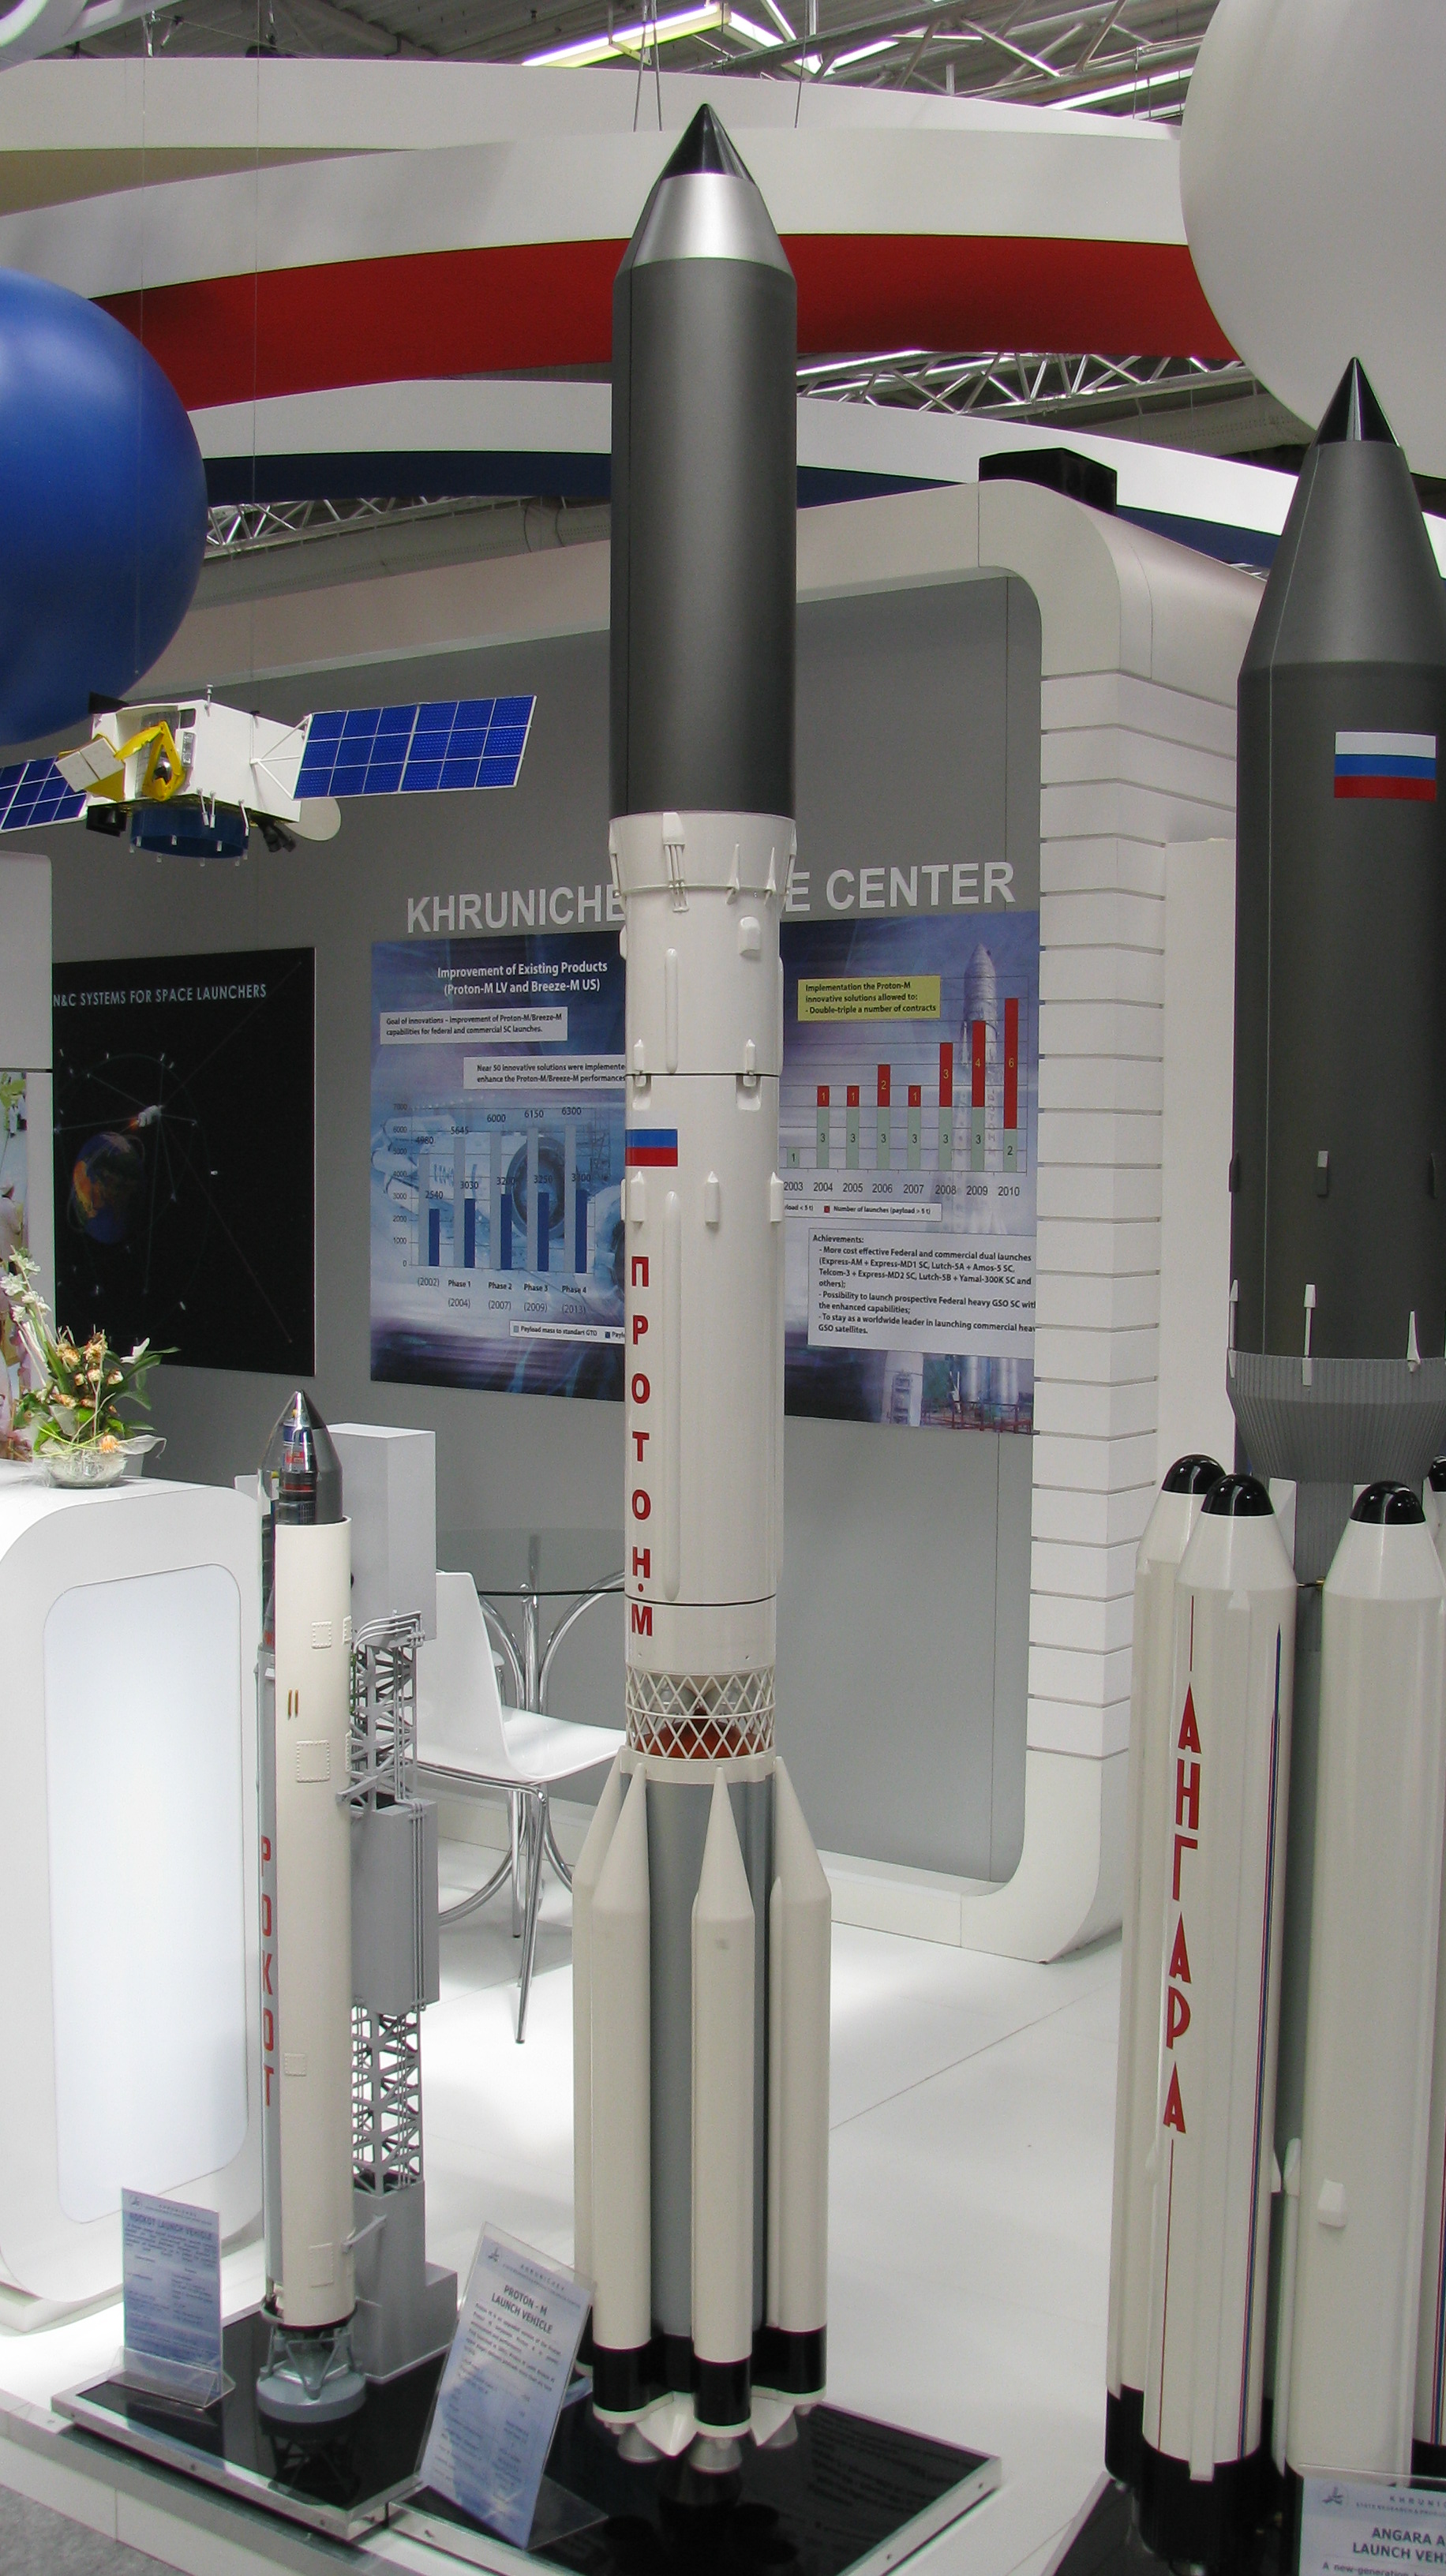 Model of Proton-M launcher with 5m fairing